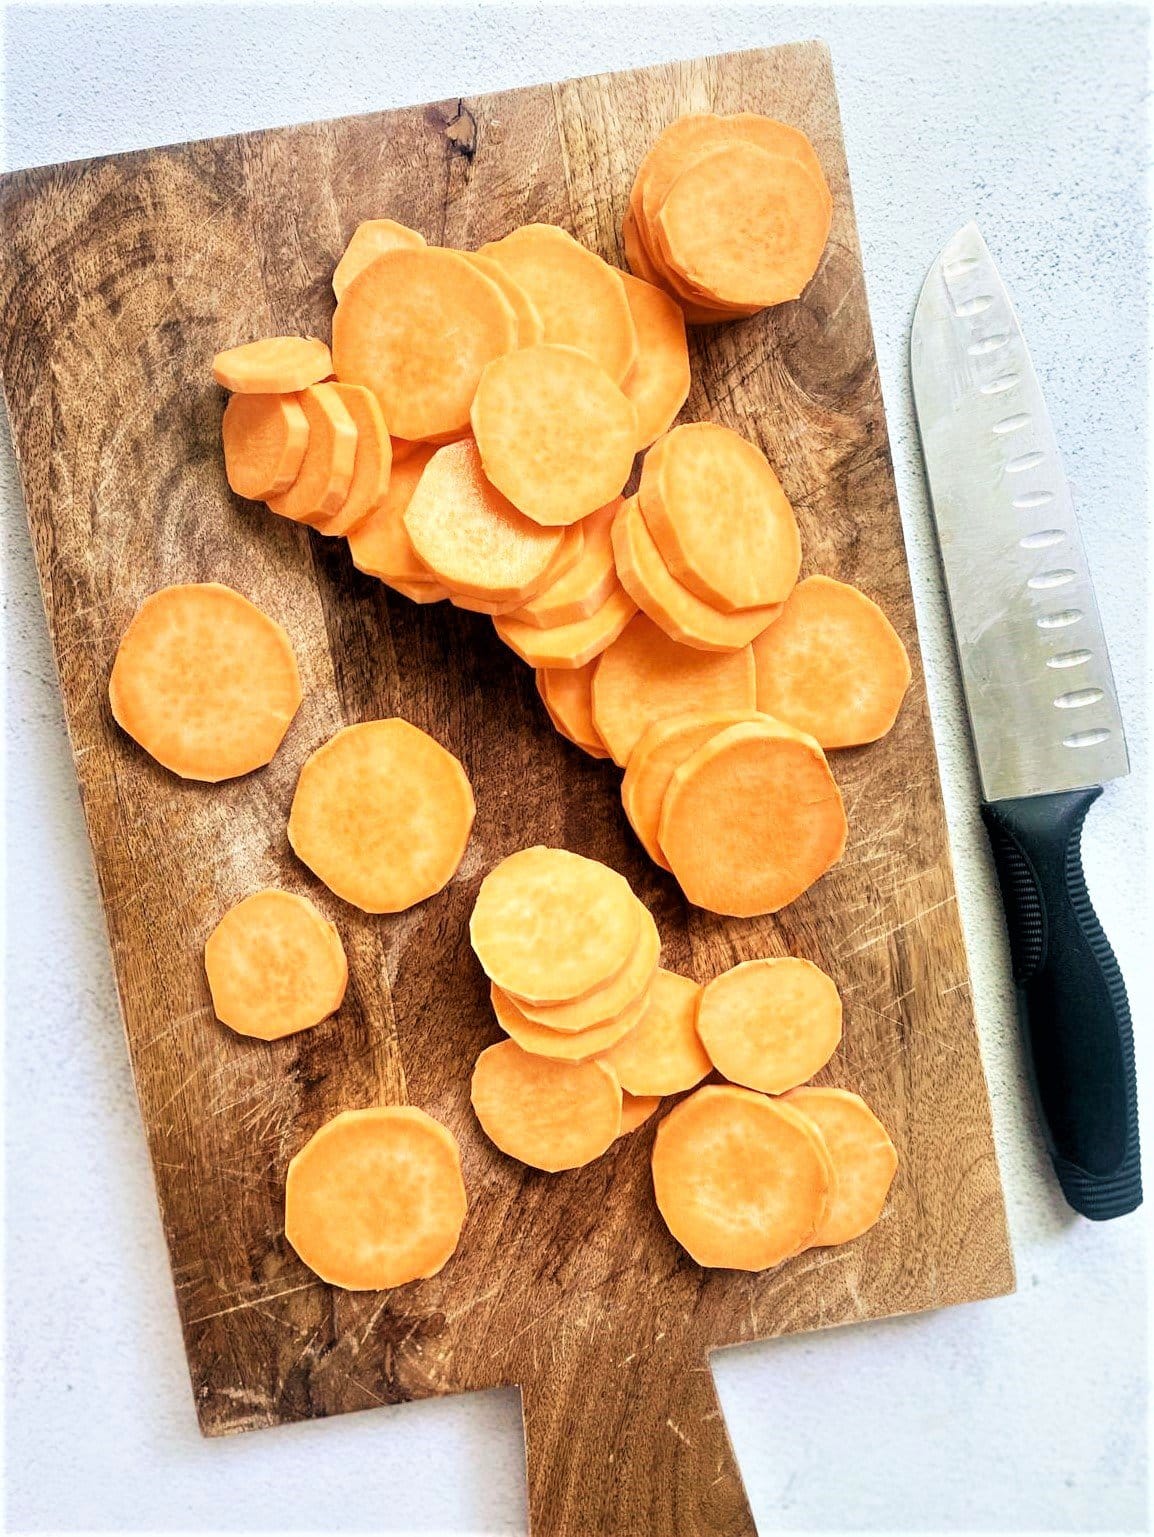 Top down image of sweet potatoes slices on top of a wooden board with a kitchen knife alongside.